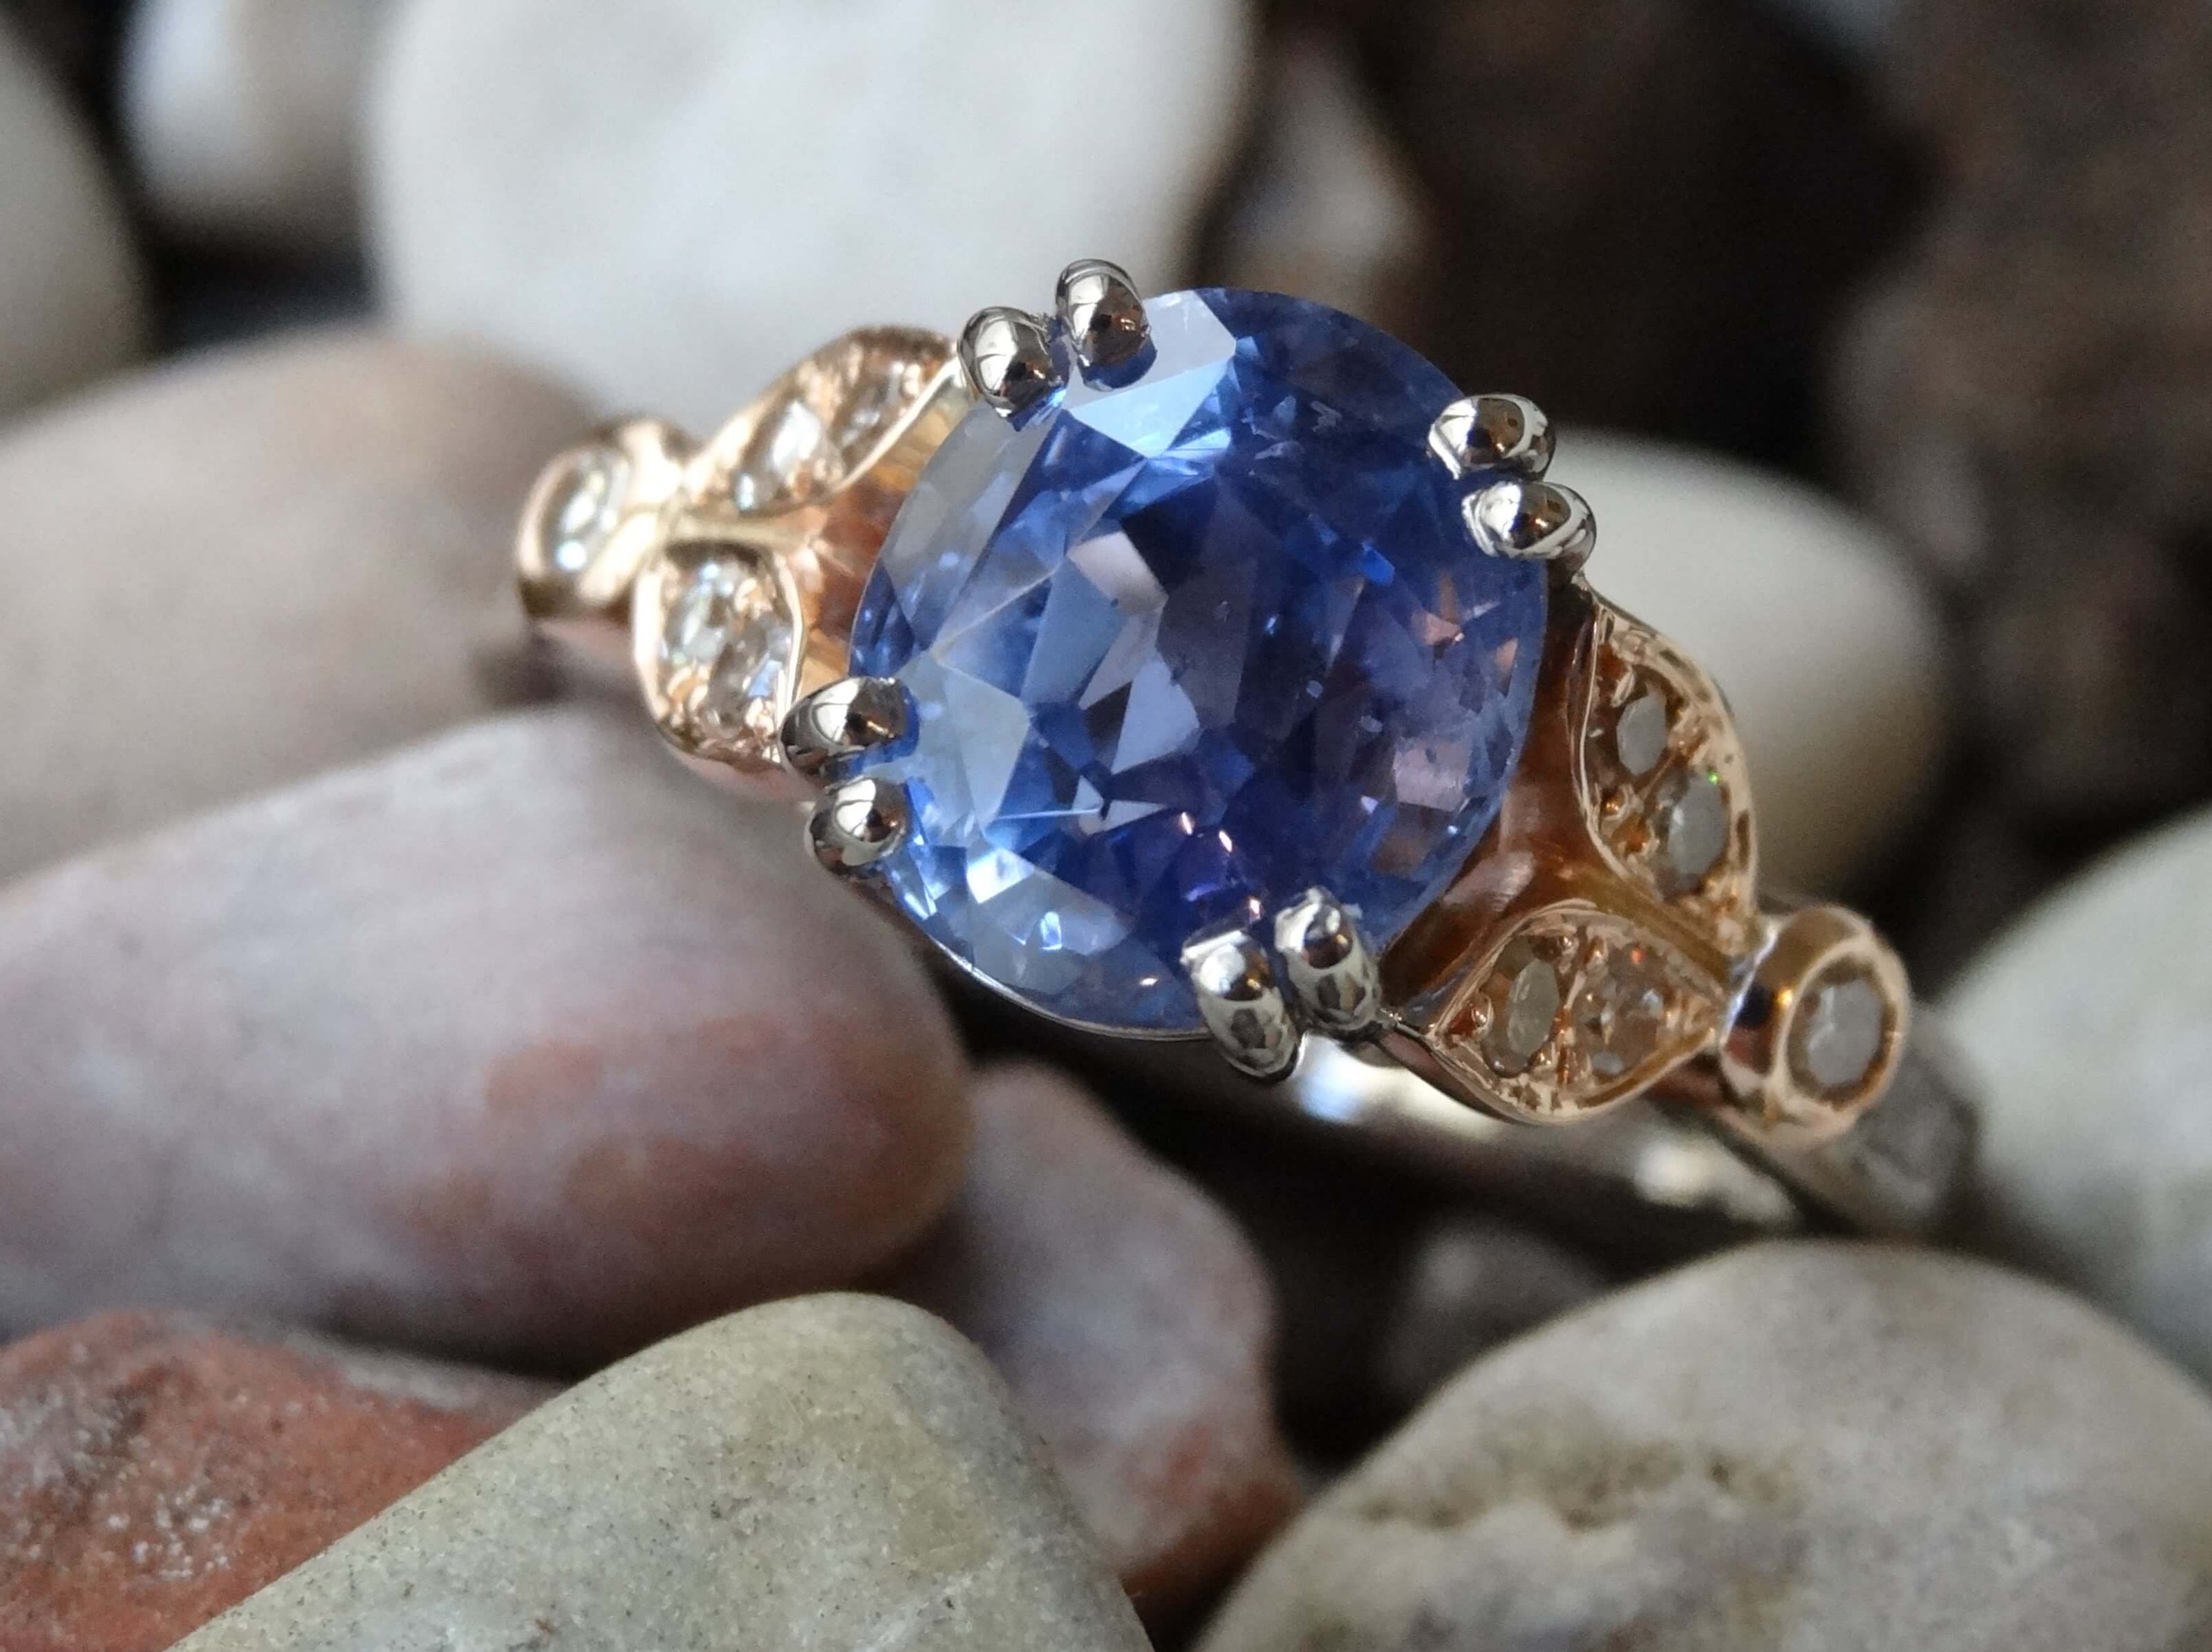 A re-cut sapphire is double claw set in white gold with rose gold and diamond shoulders